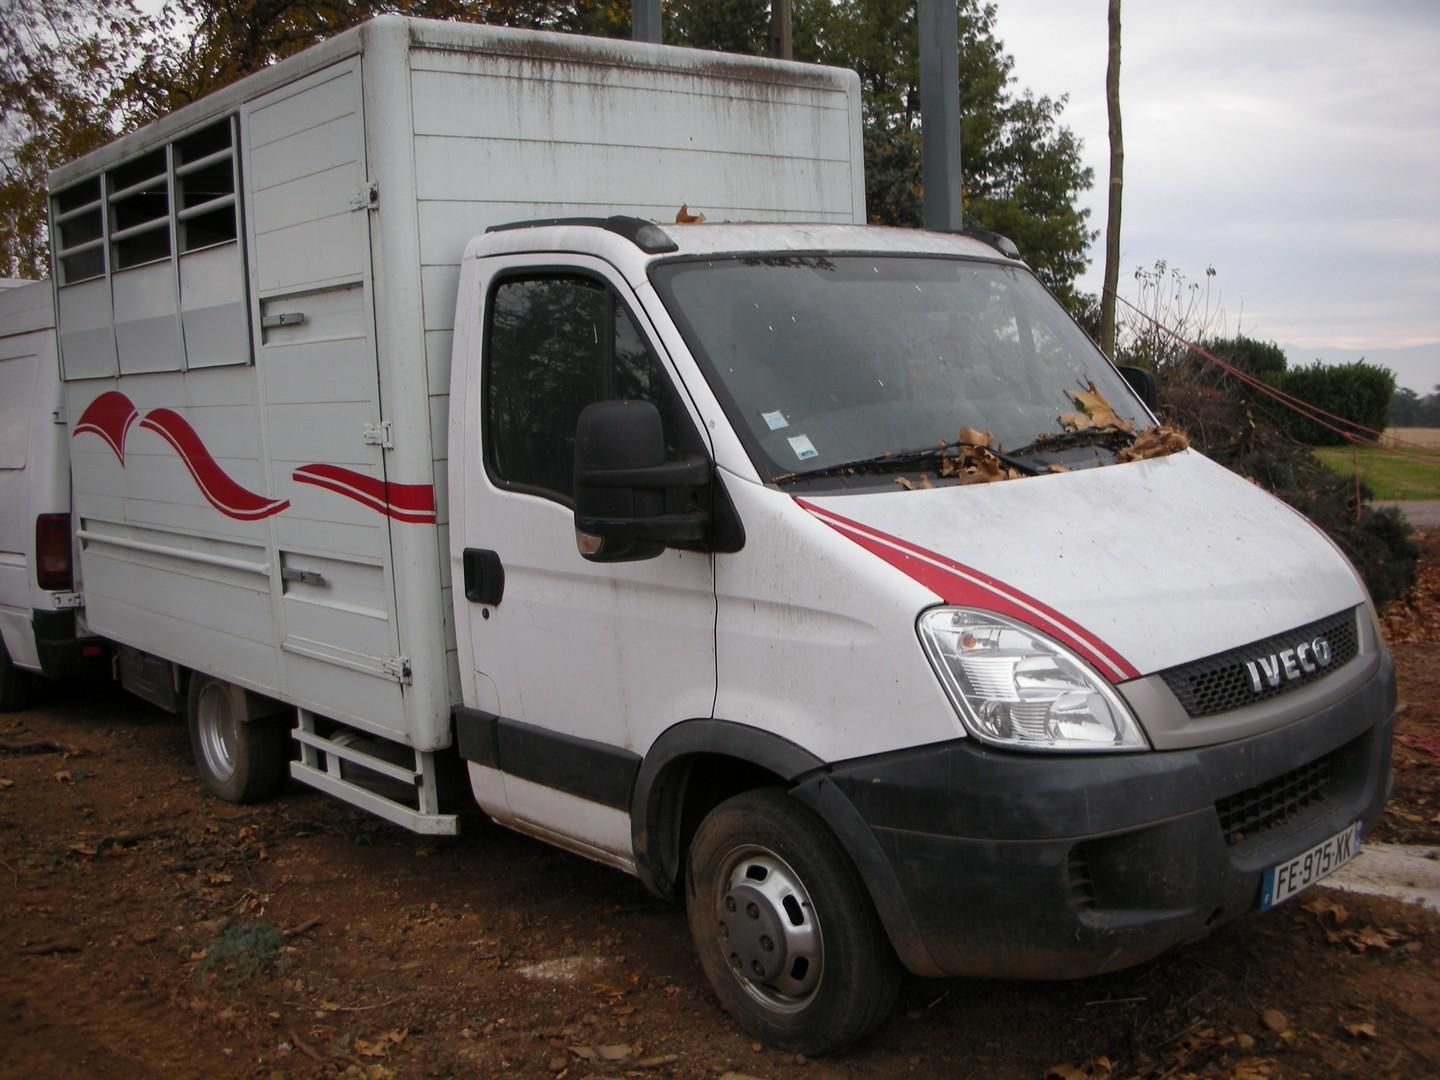 Null [RP][ACI] 
Reserved for professionals
IVECO 35C12 diesel cattle van, imm. F&hellip;